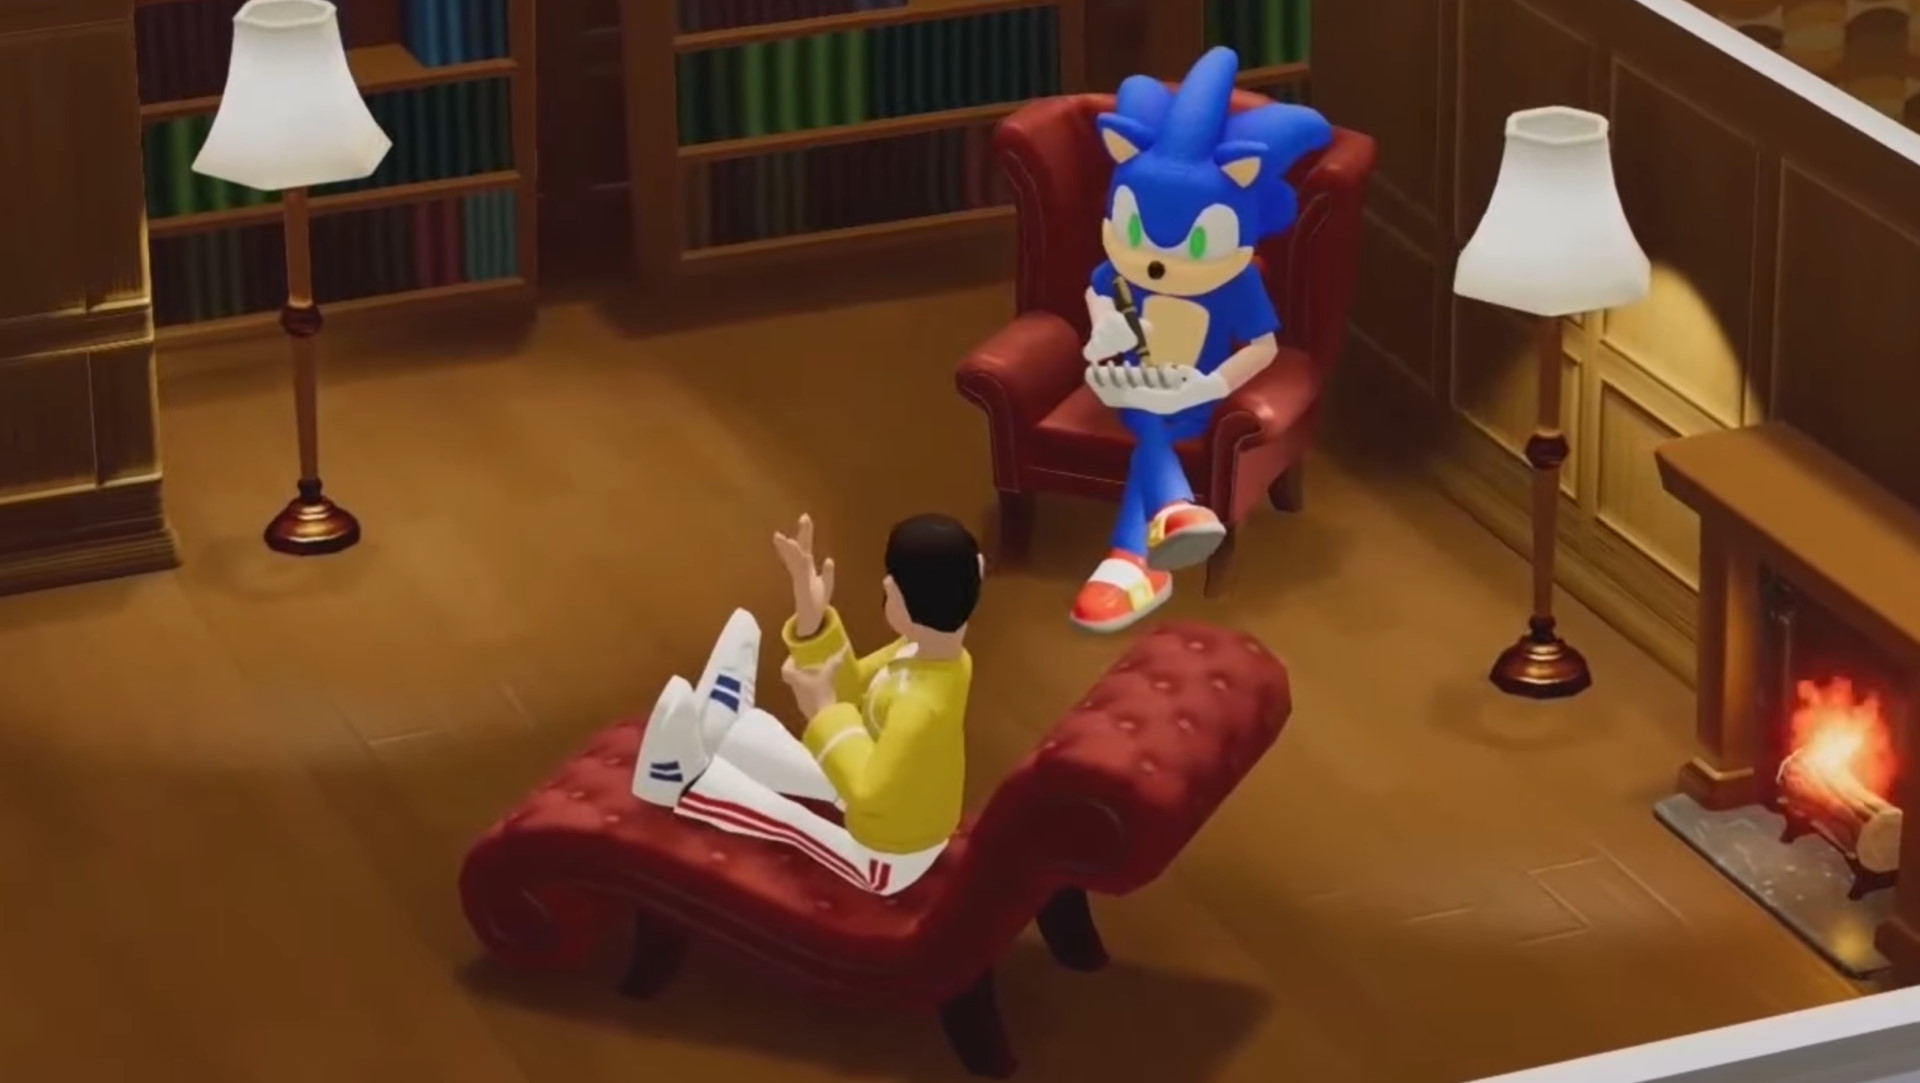  In one of the weirdest game crossovers ever, Sonic the Hedgehog is now in Two Point Hospital 